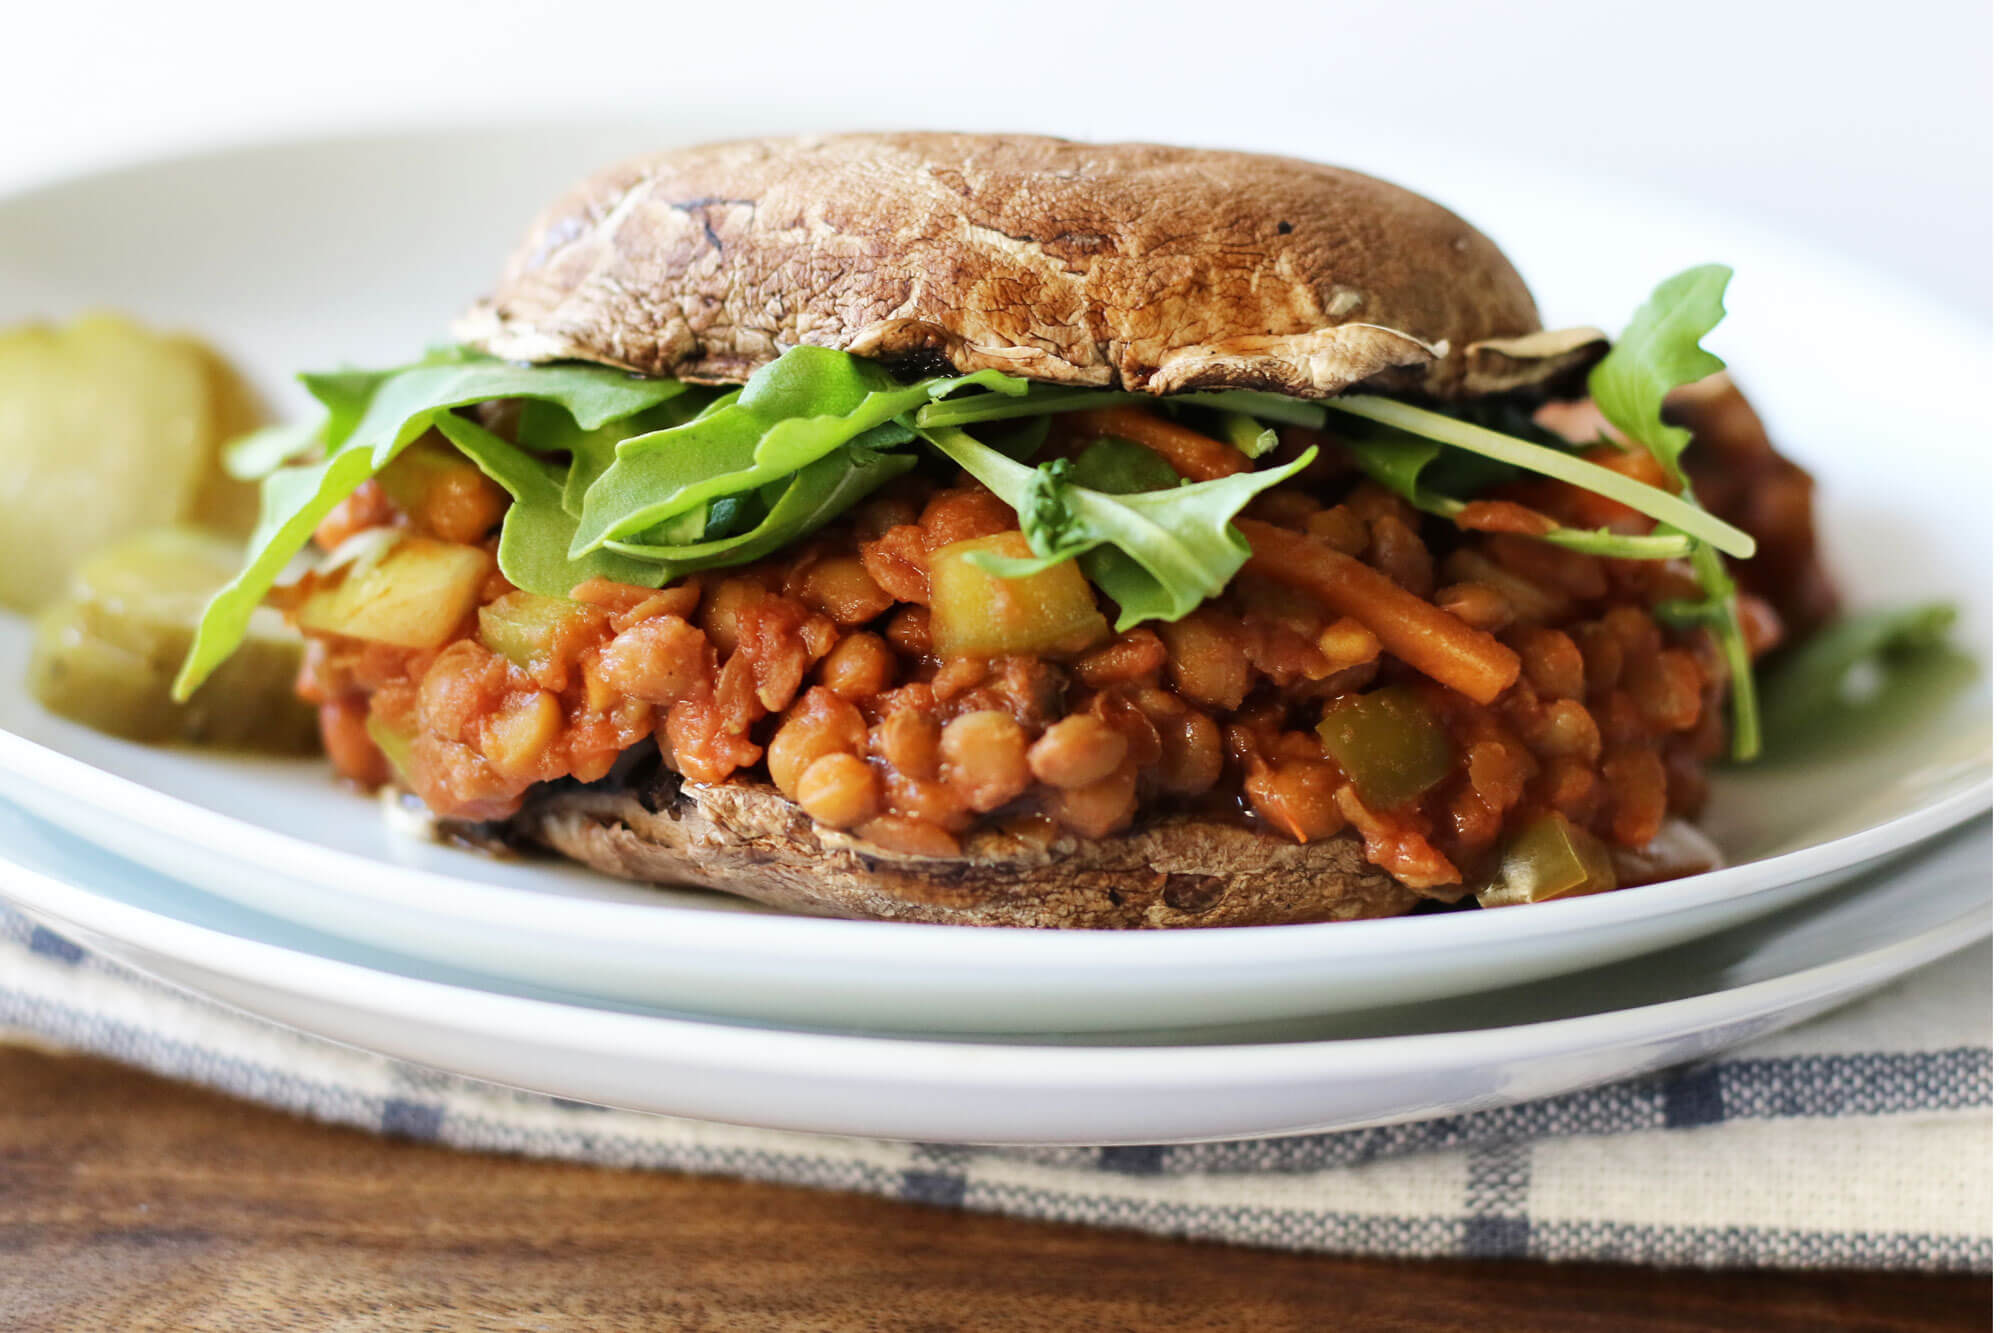 20 High Protein, Plant-Based Meals Your Clients Will Love: Vegan Sloppy Joes